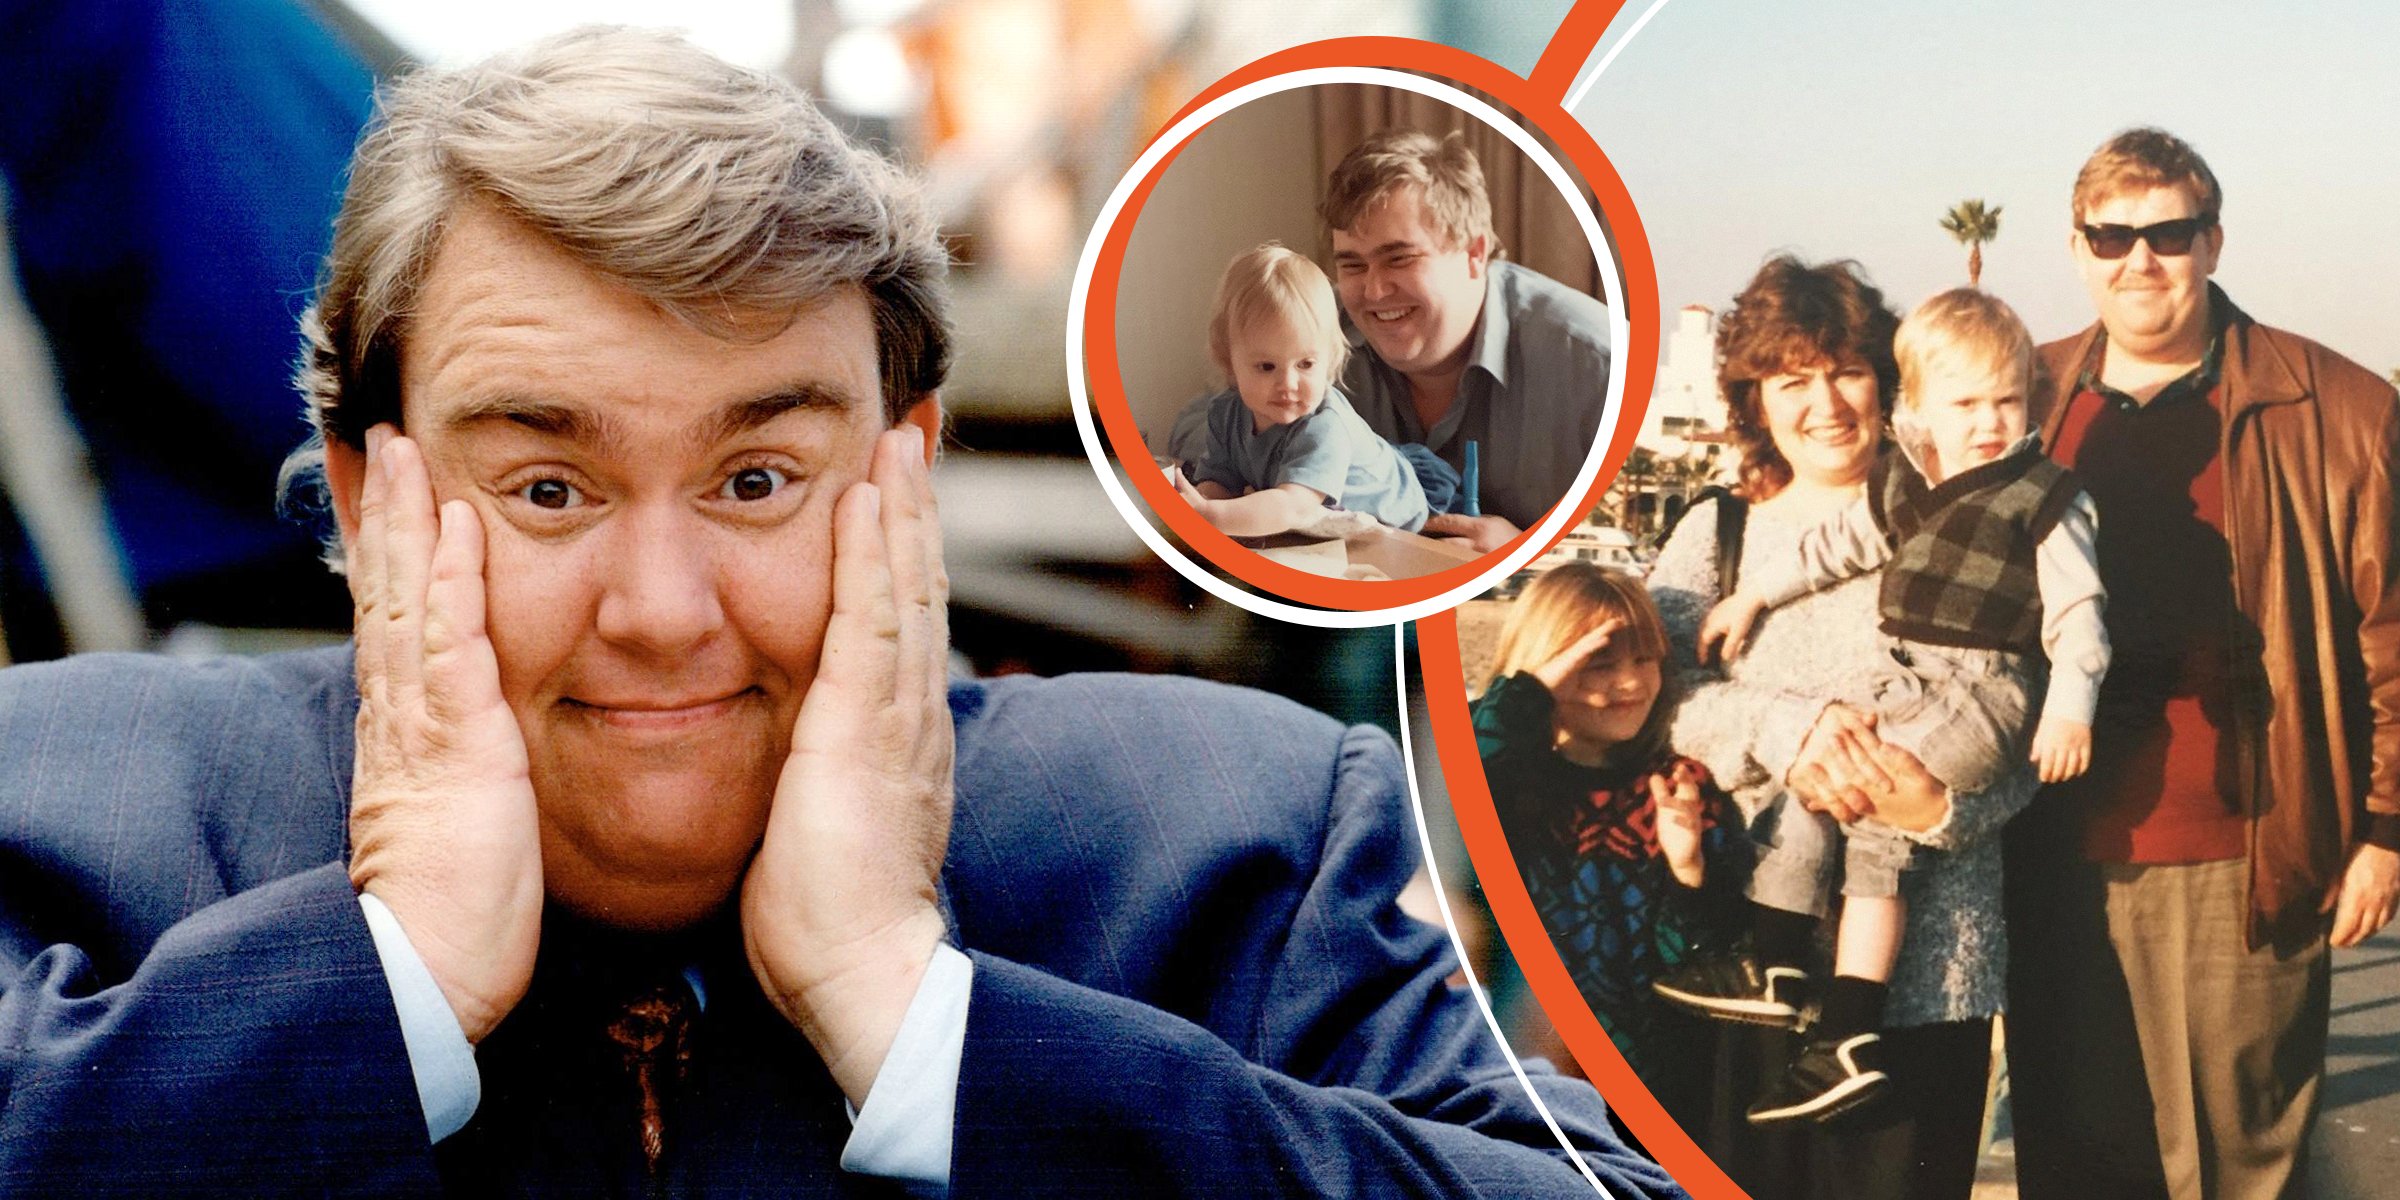 John Candy ┃John Candy and Christopher Candy ┃Jennifer Candy, Rosemary Hobor, Christopher Candy and John Candy ┃Source:  Getty Images | instagram.com/chriscandy4ever ┃ instagram.com/therealjencandy